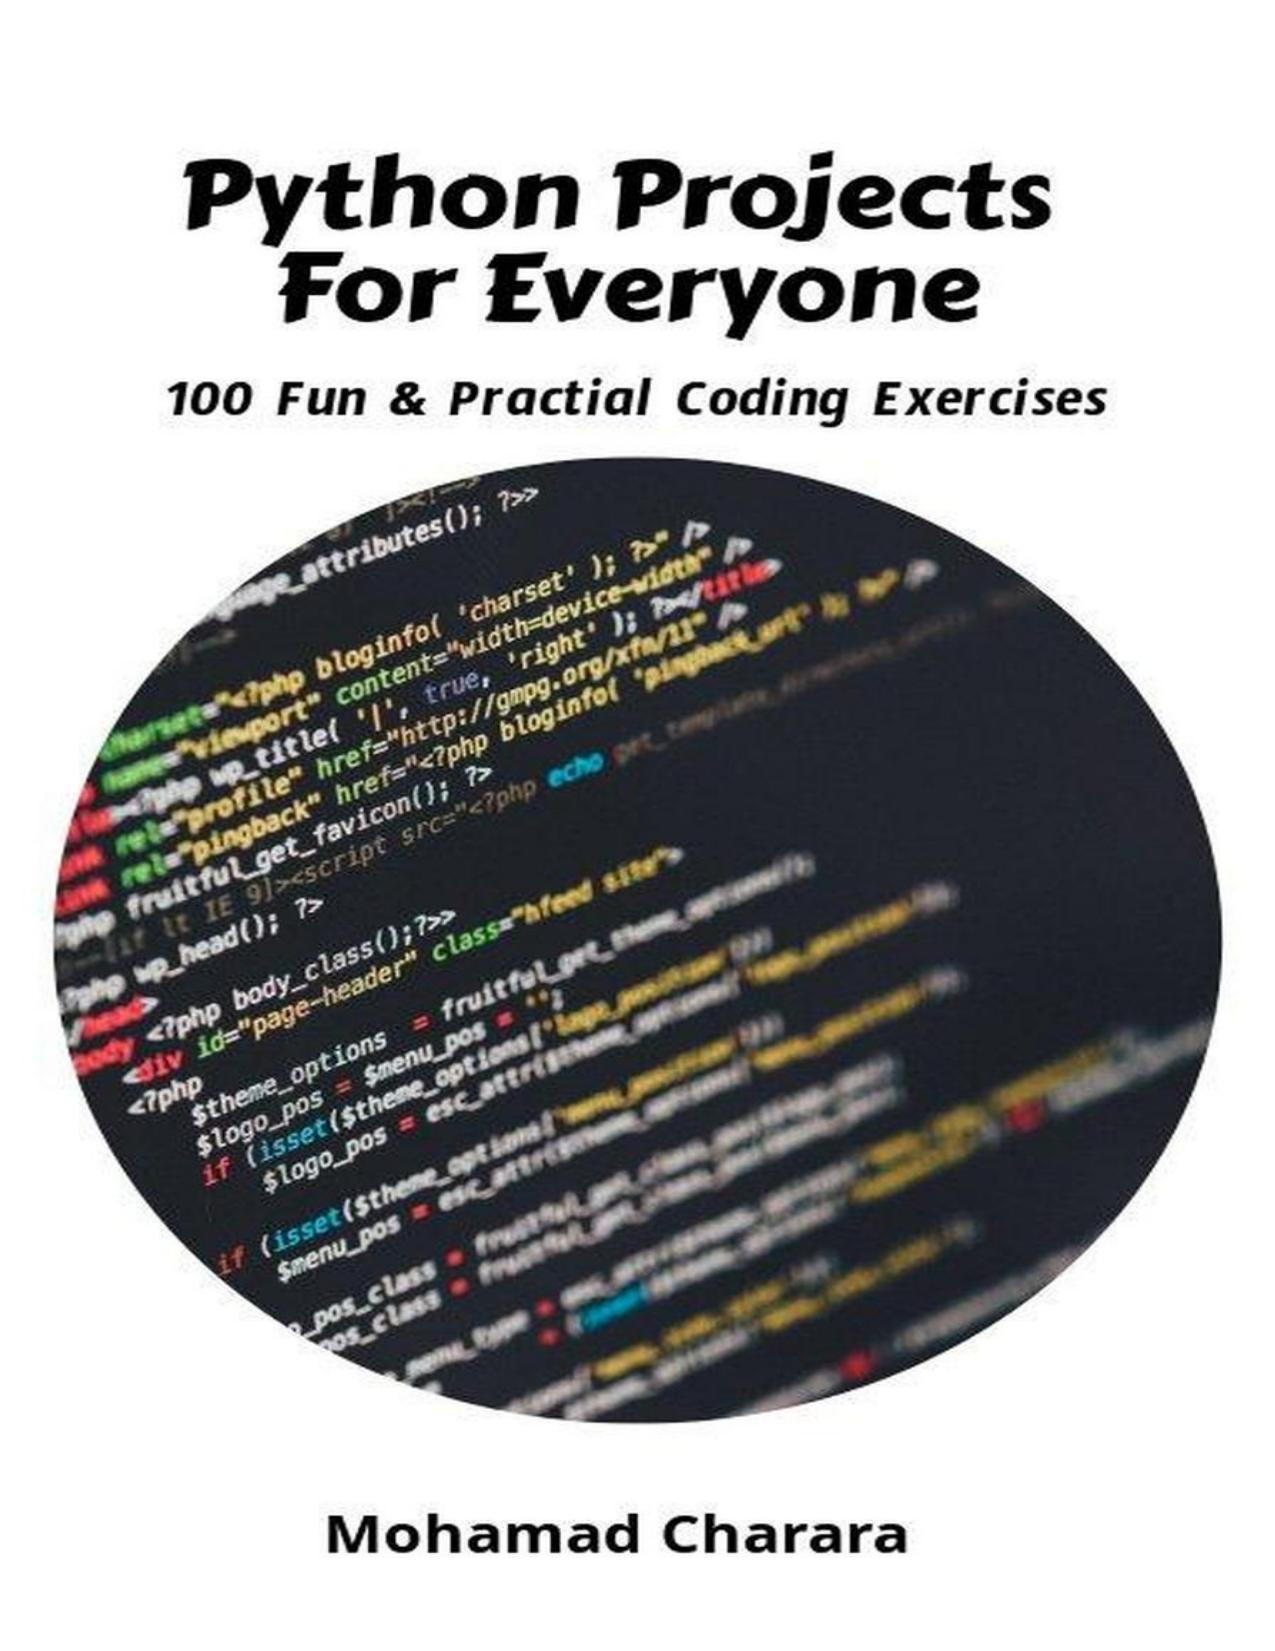 Python Projects for Everyone by Mohamad Charara